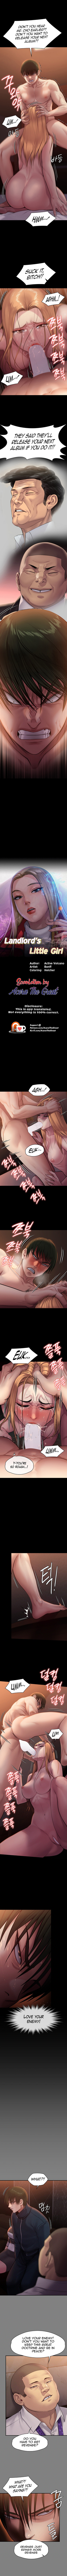 Panel Image 1 for chapter 240 of manhwa Queen Bee on read.oppai.stream